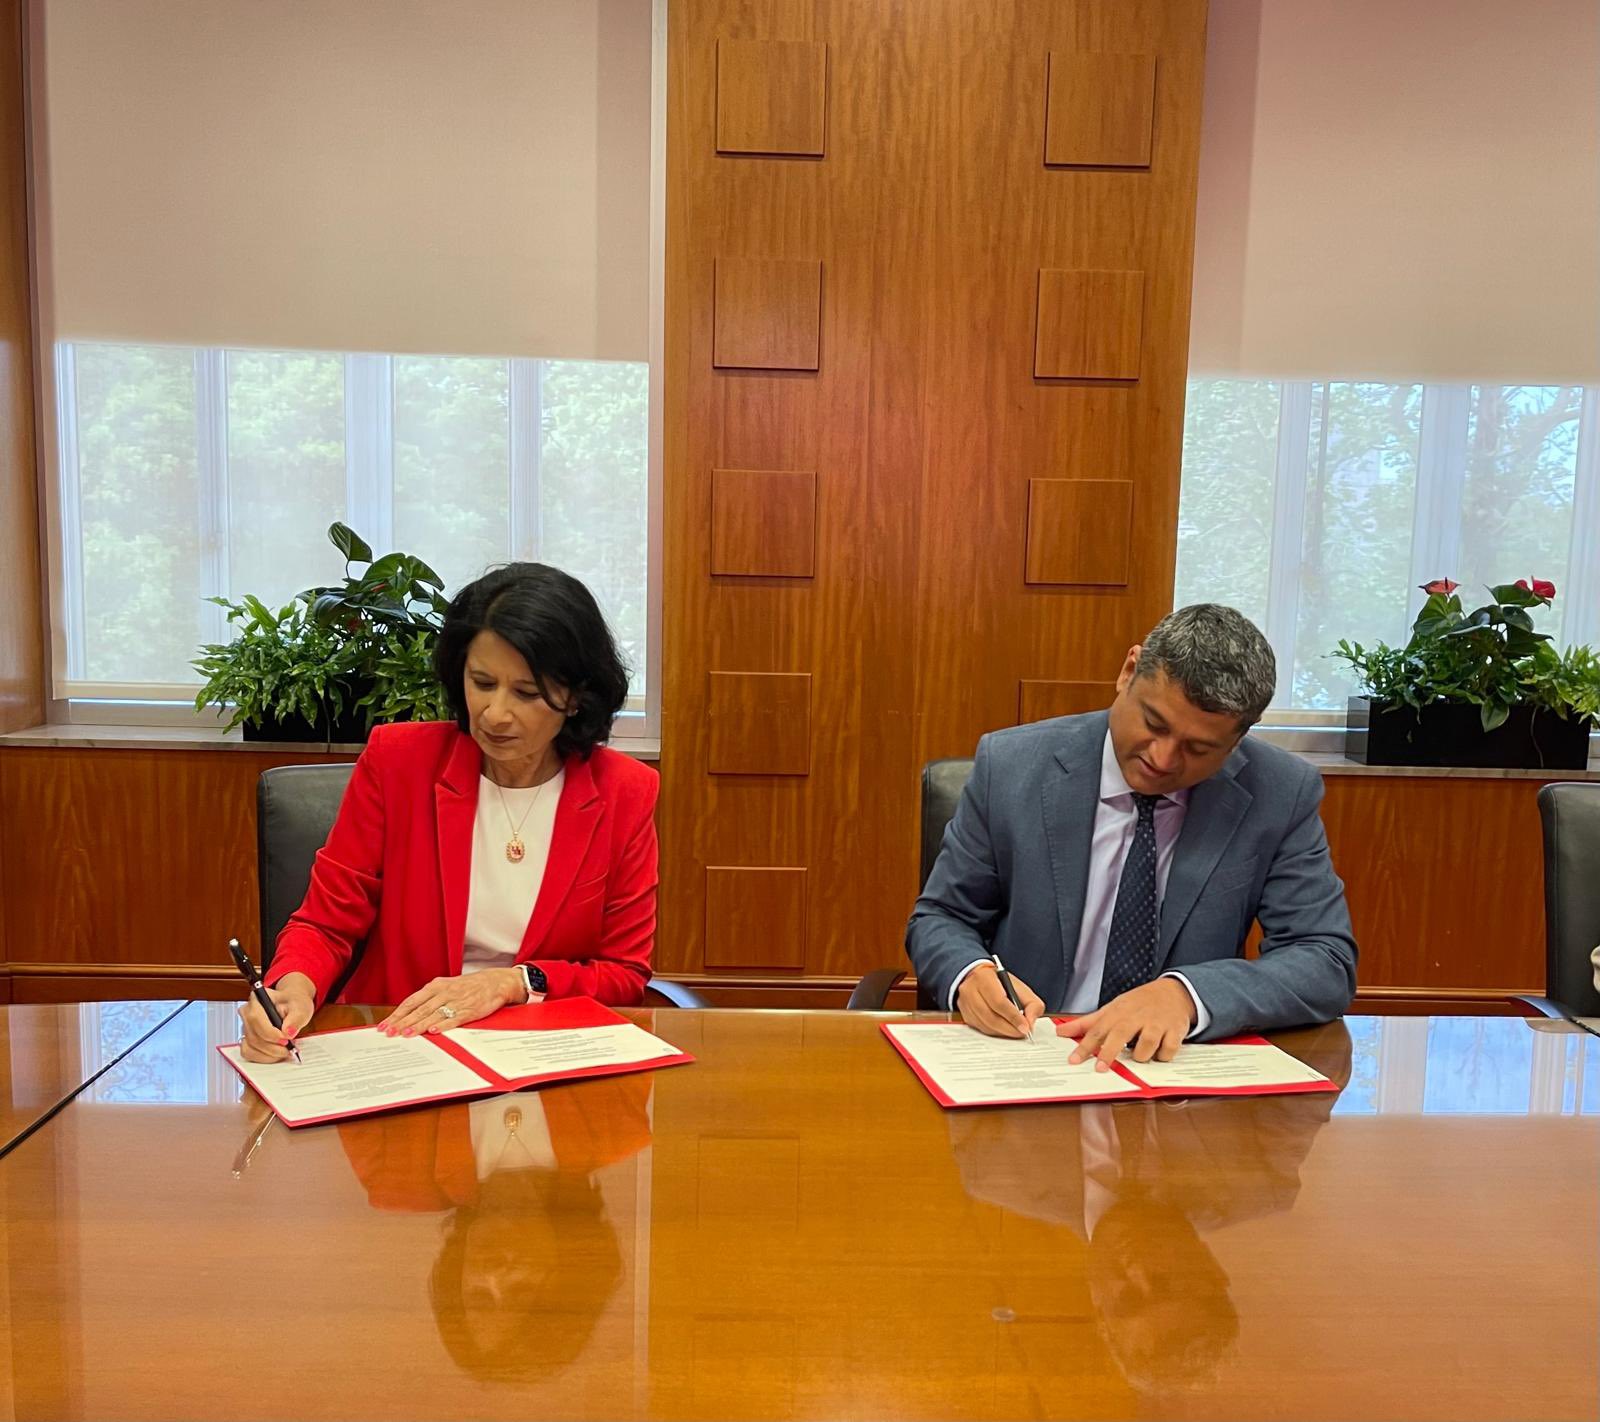 Addendum to renew the MoU between Indian Council for Cultural Relations & University of Houston for establishment of Tamil Studies Chair at University of Houston